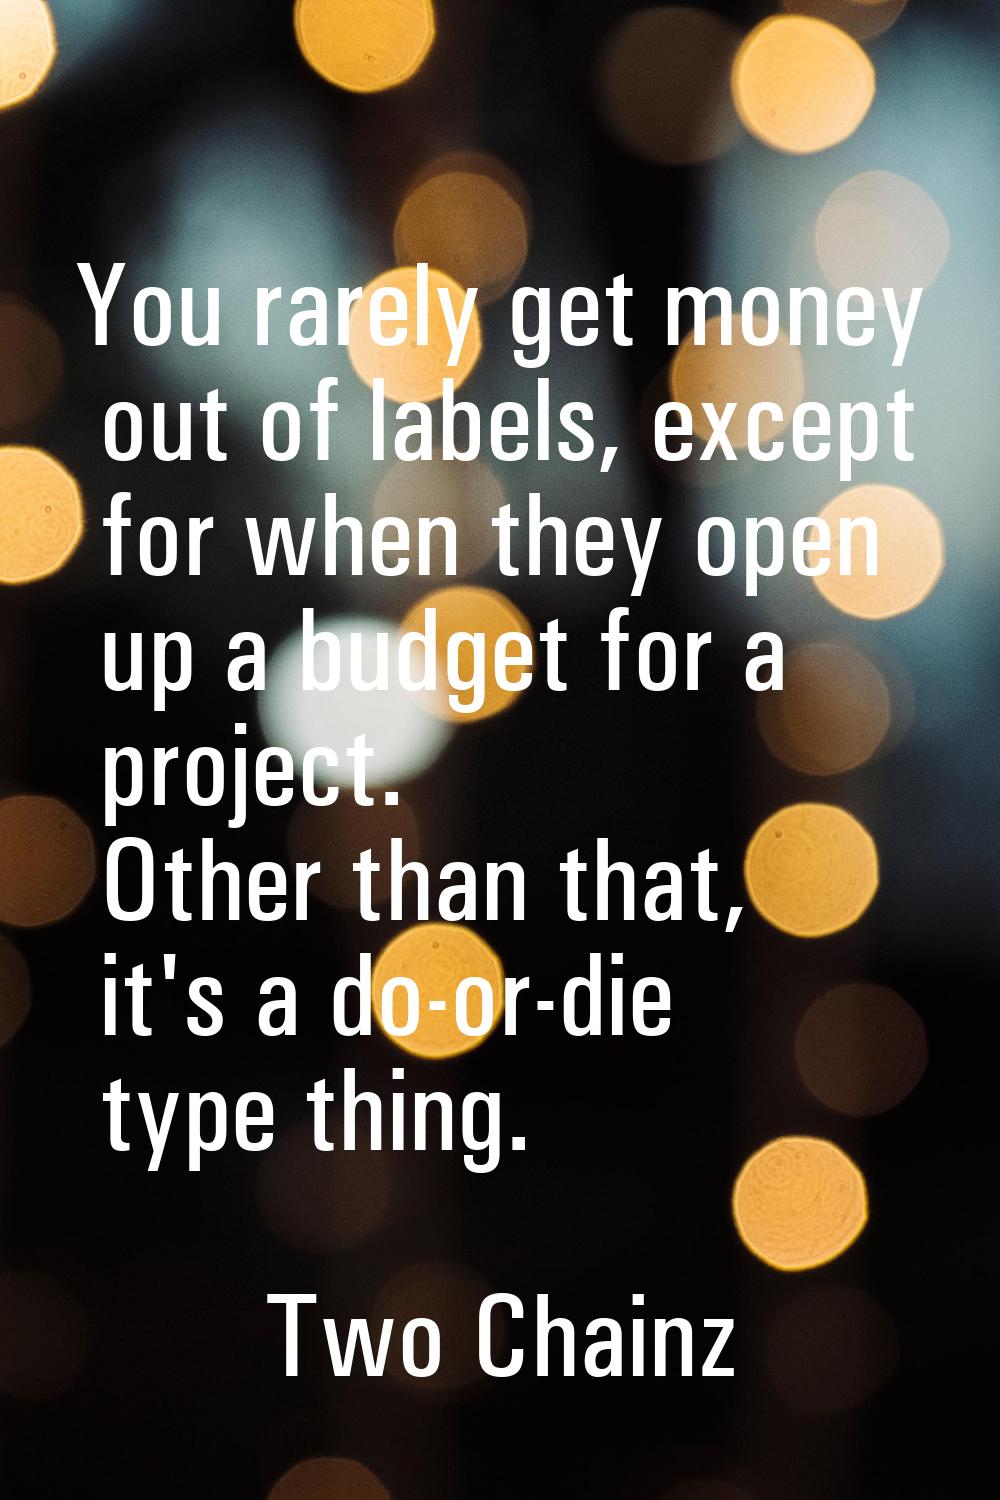 You rarely get money out of labels, except for when they open up a budget for a project. Other than